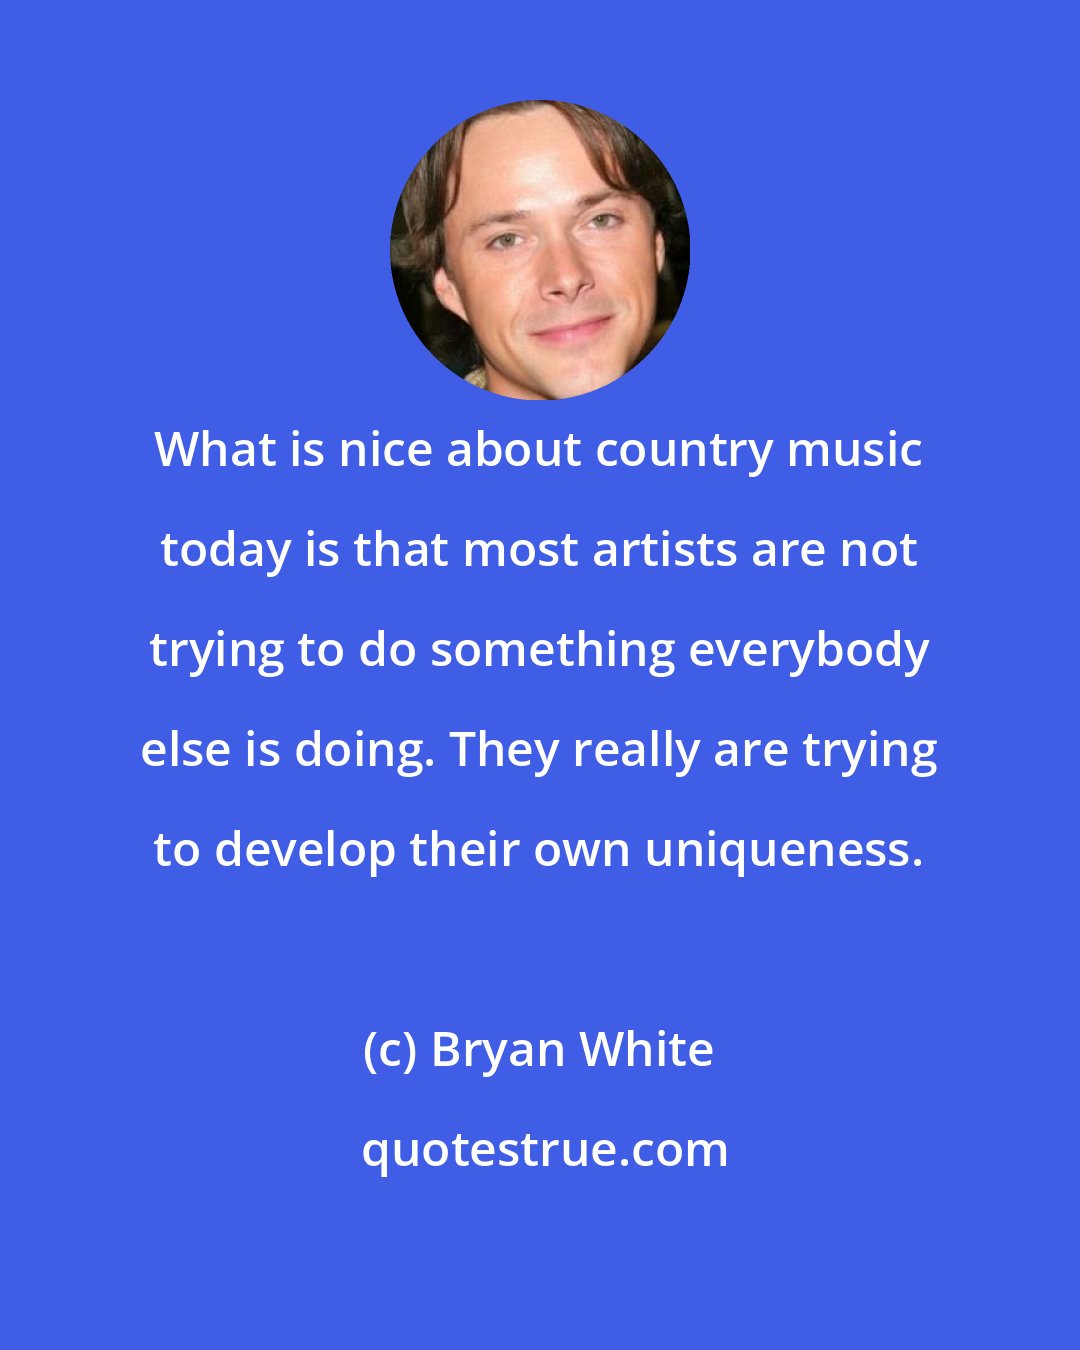 Bryan White: What is nice about country music today is that most artists are not trying to do something everybody else is doing. They really are trying to develop their own uniqueness.